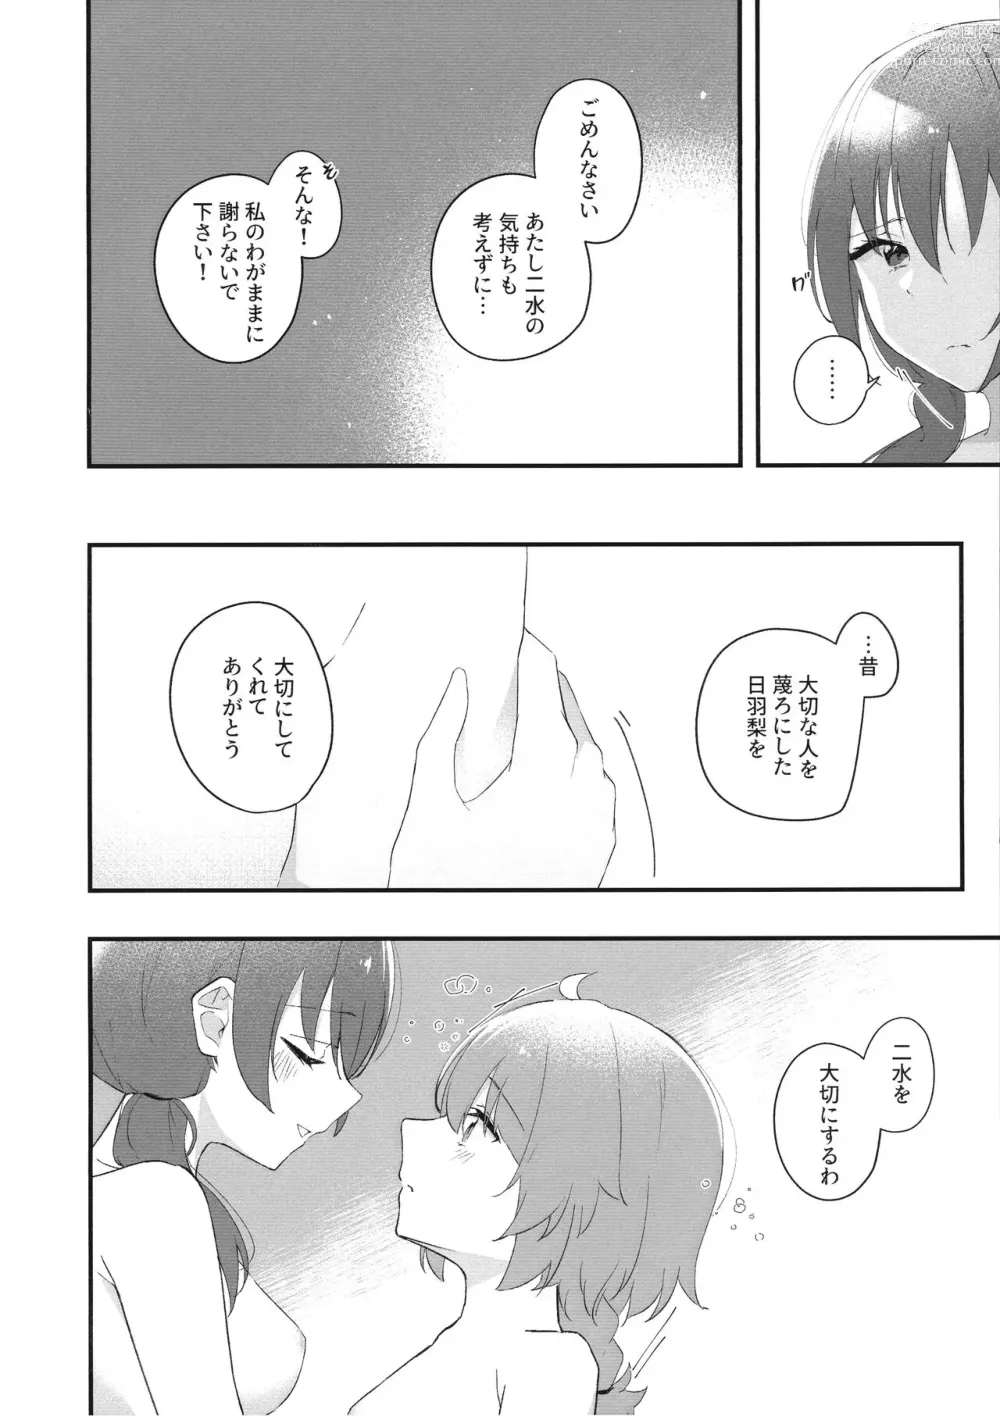 Page 13 of doujinshi Mabataki - without blink, could not find it